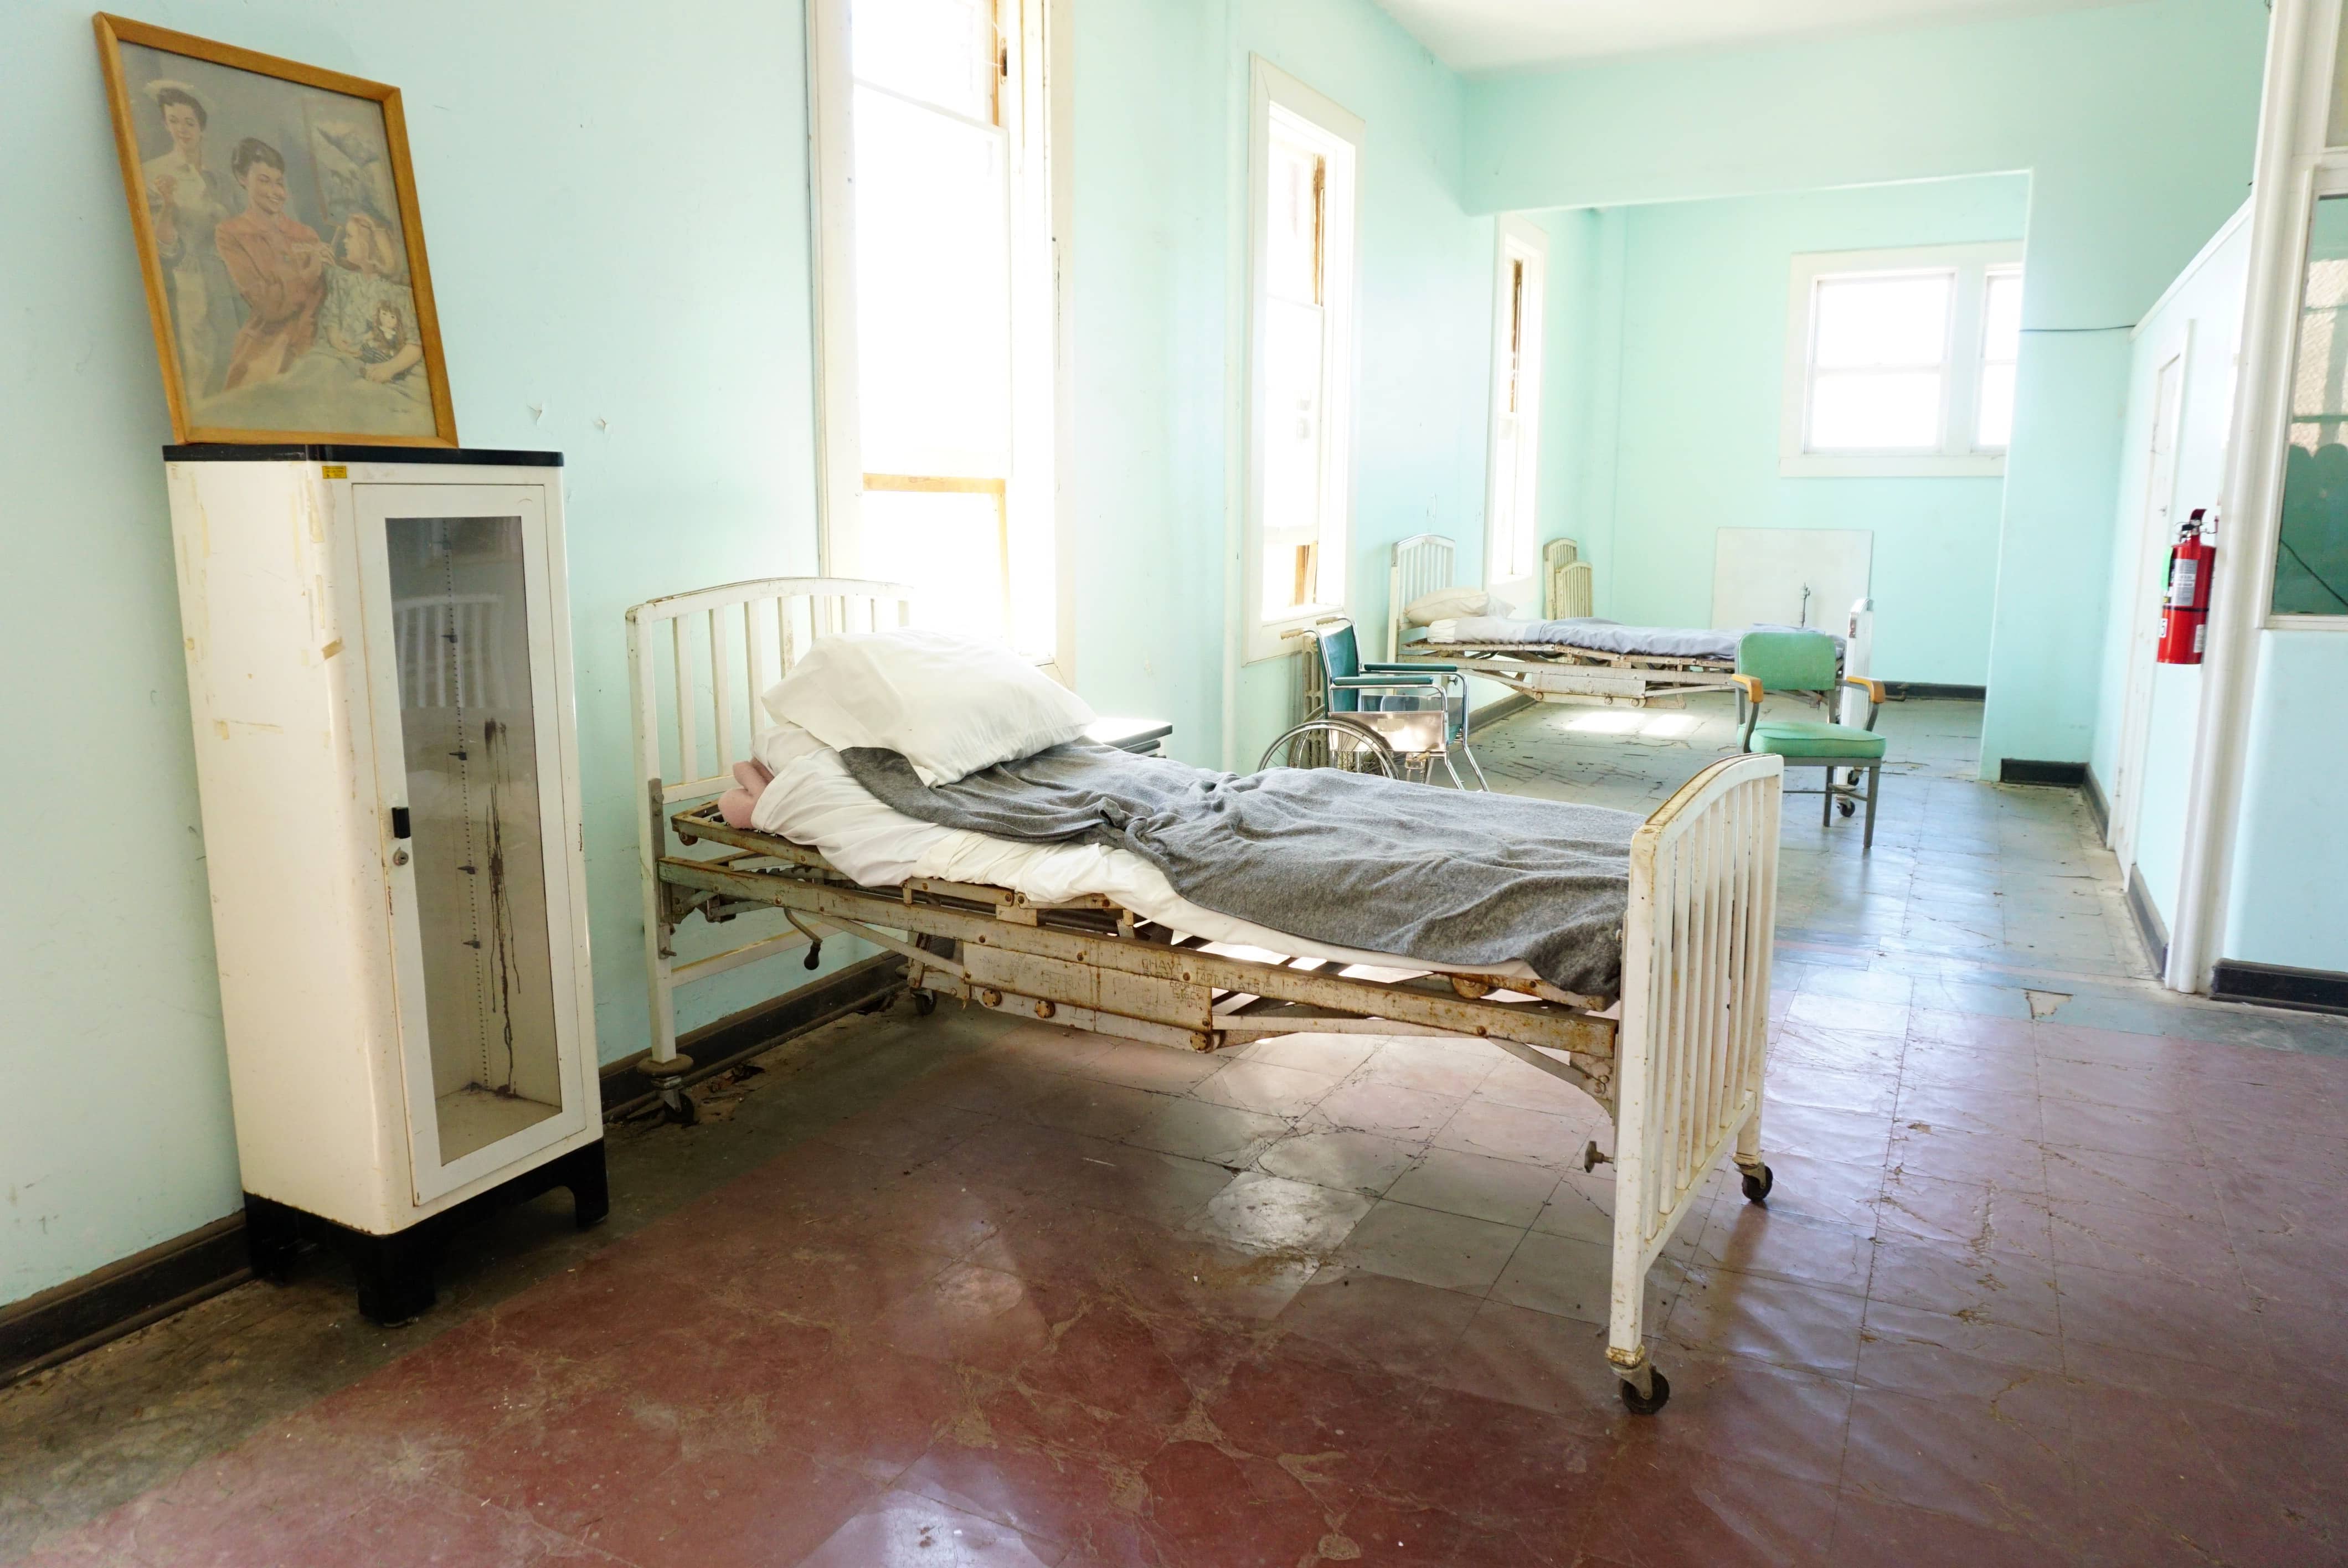 room full of sunlight with mint green walls and antique hospital beds and wheelchair